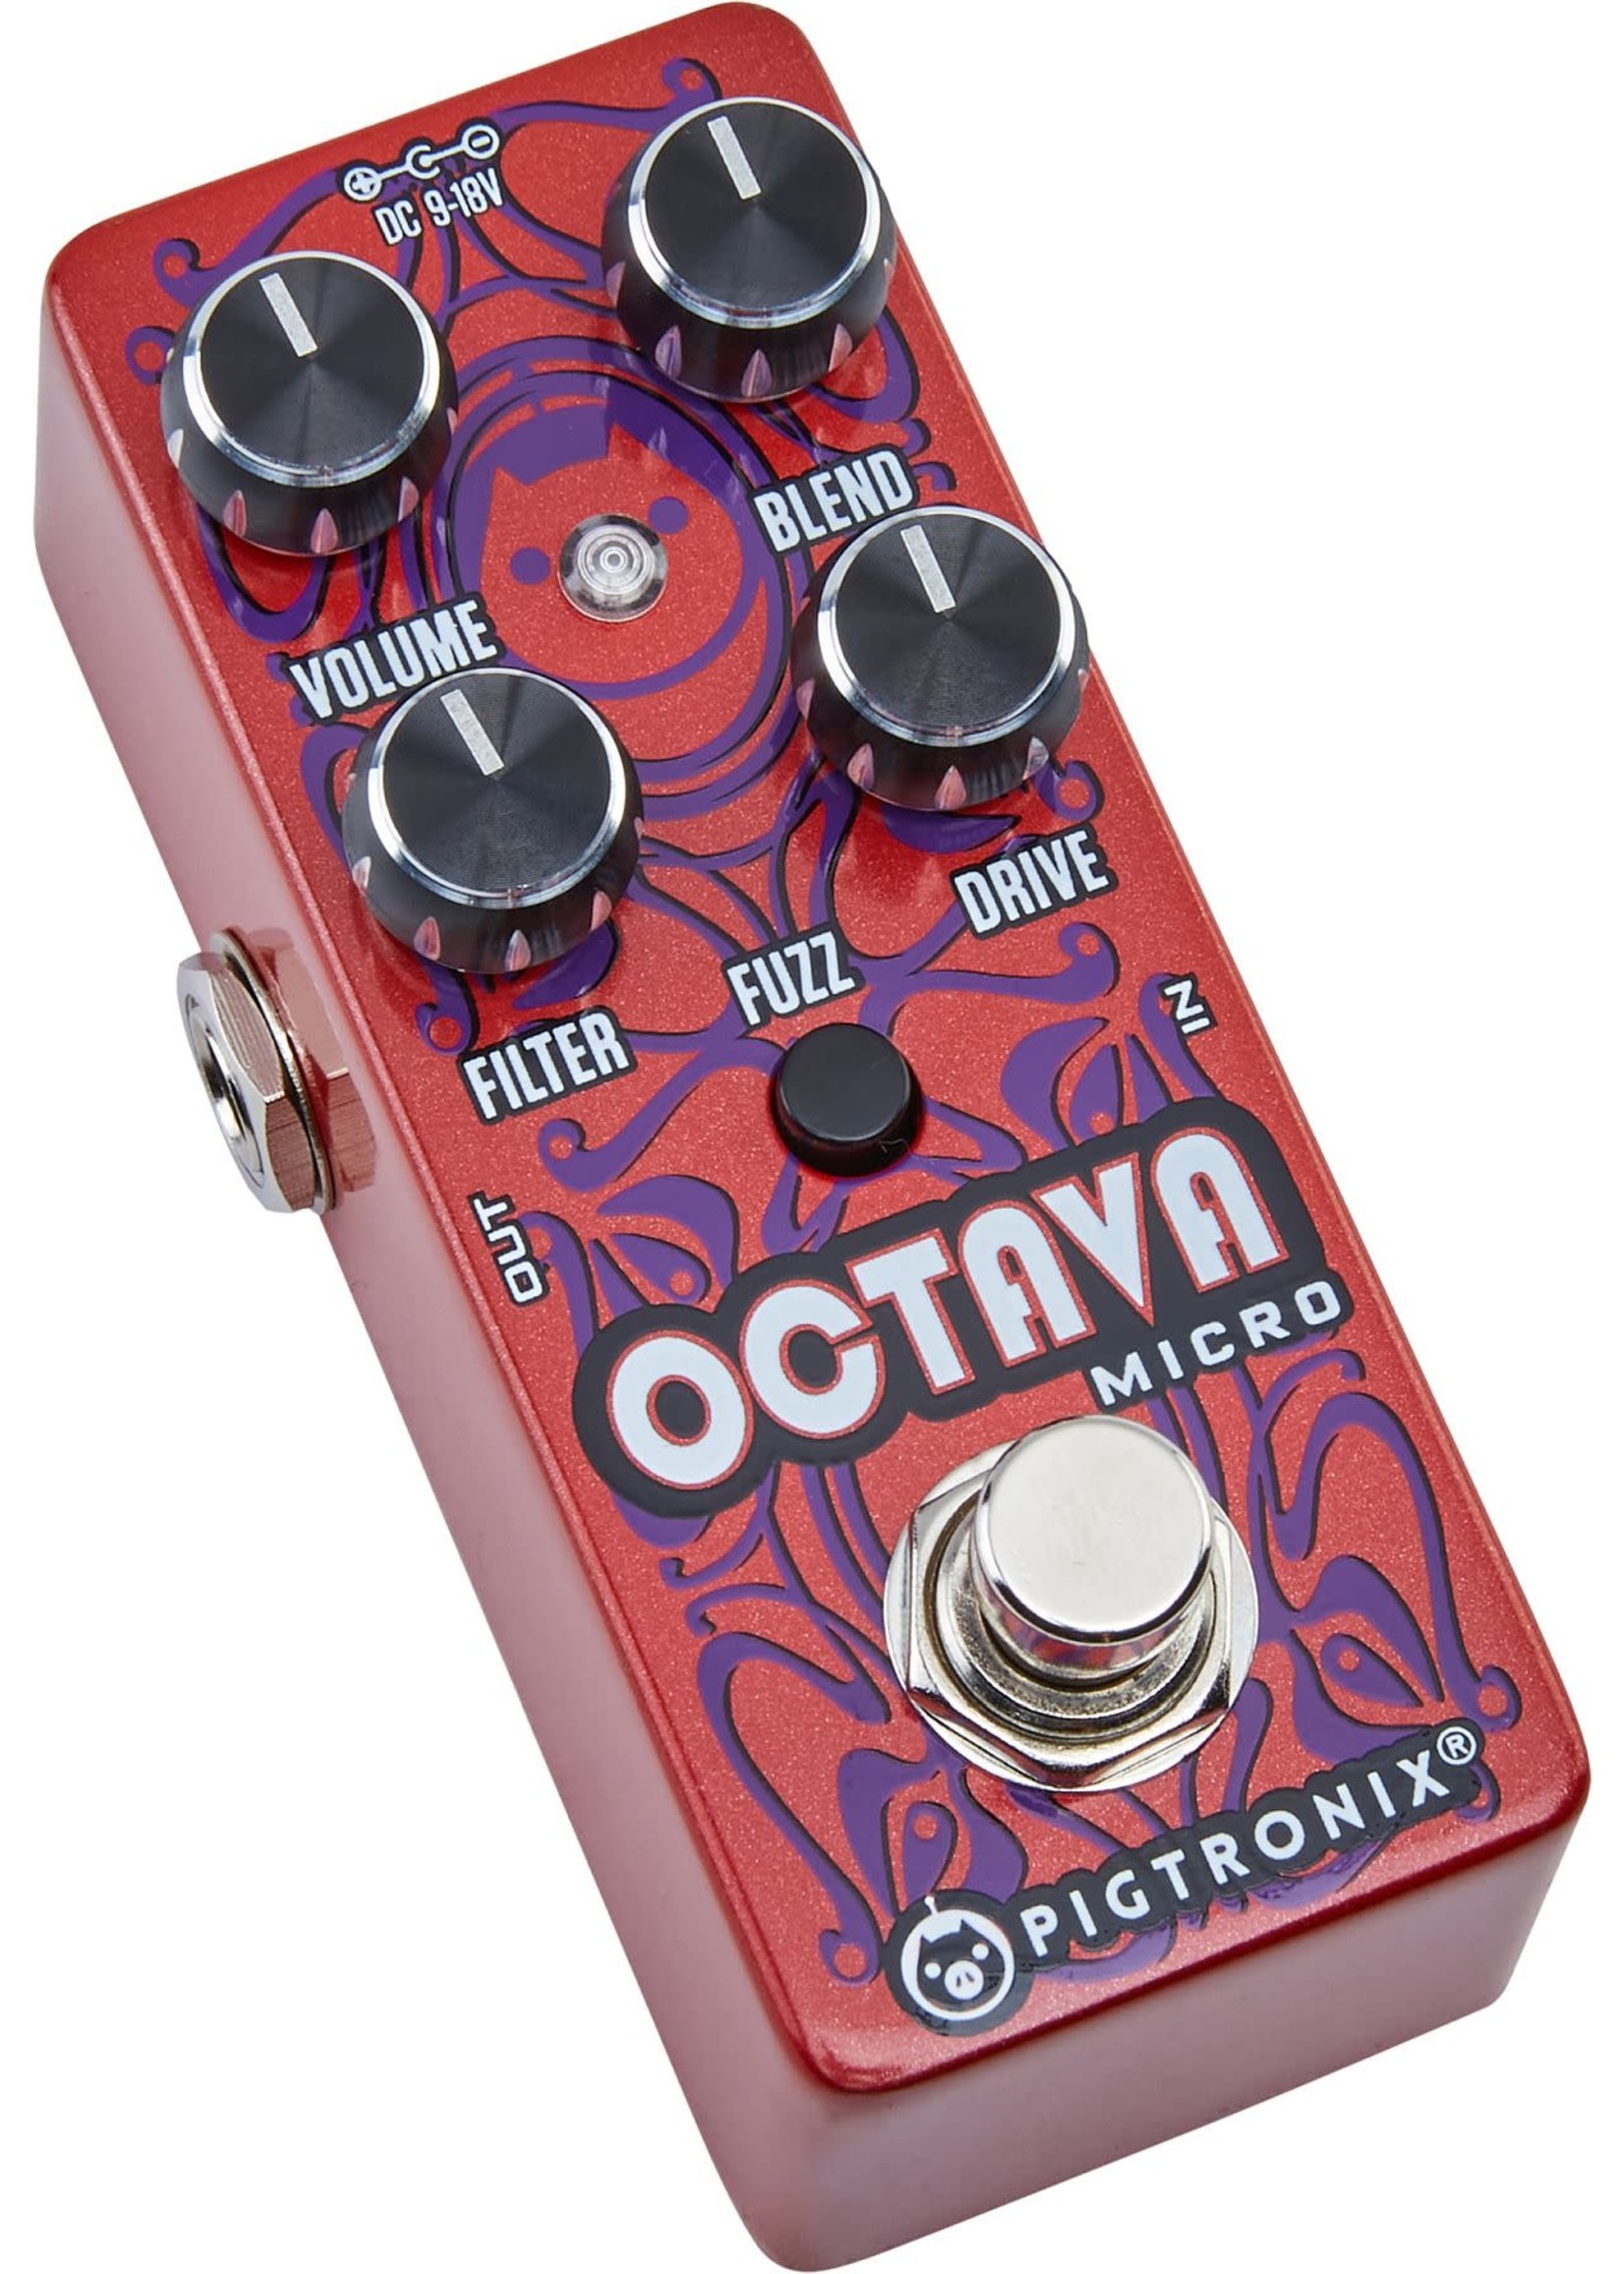 Pigtronix Pigtronix Octavia Micro Analog Octave Fuzz and Distortion Pedal